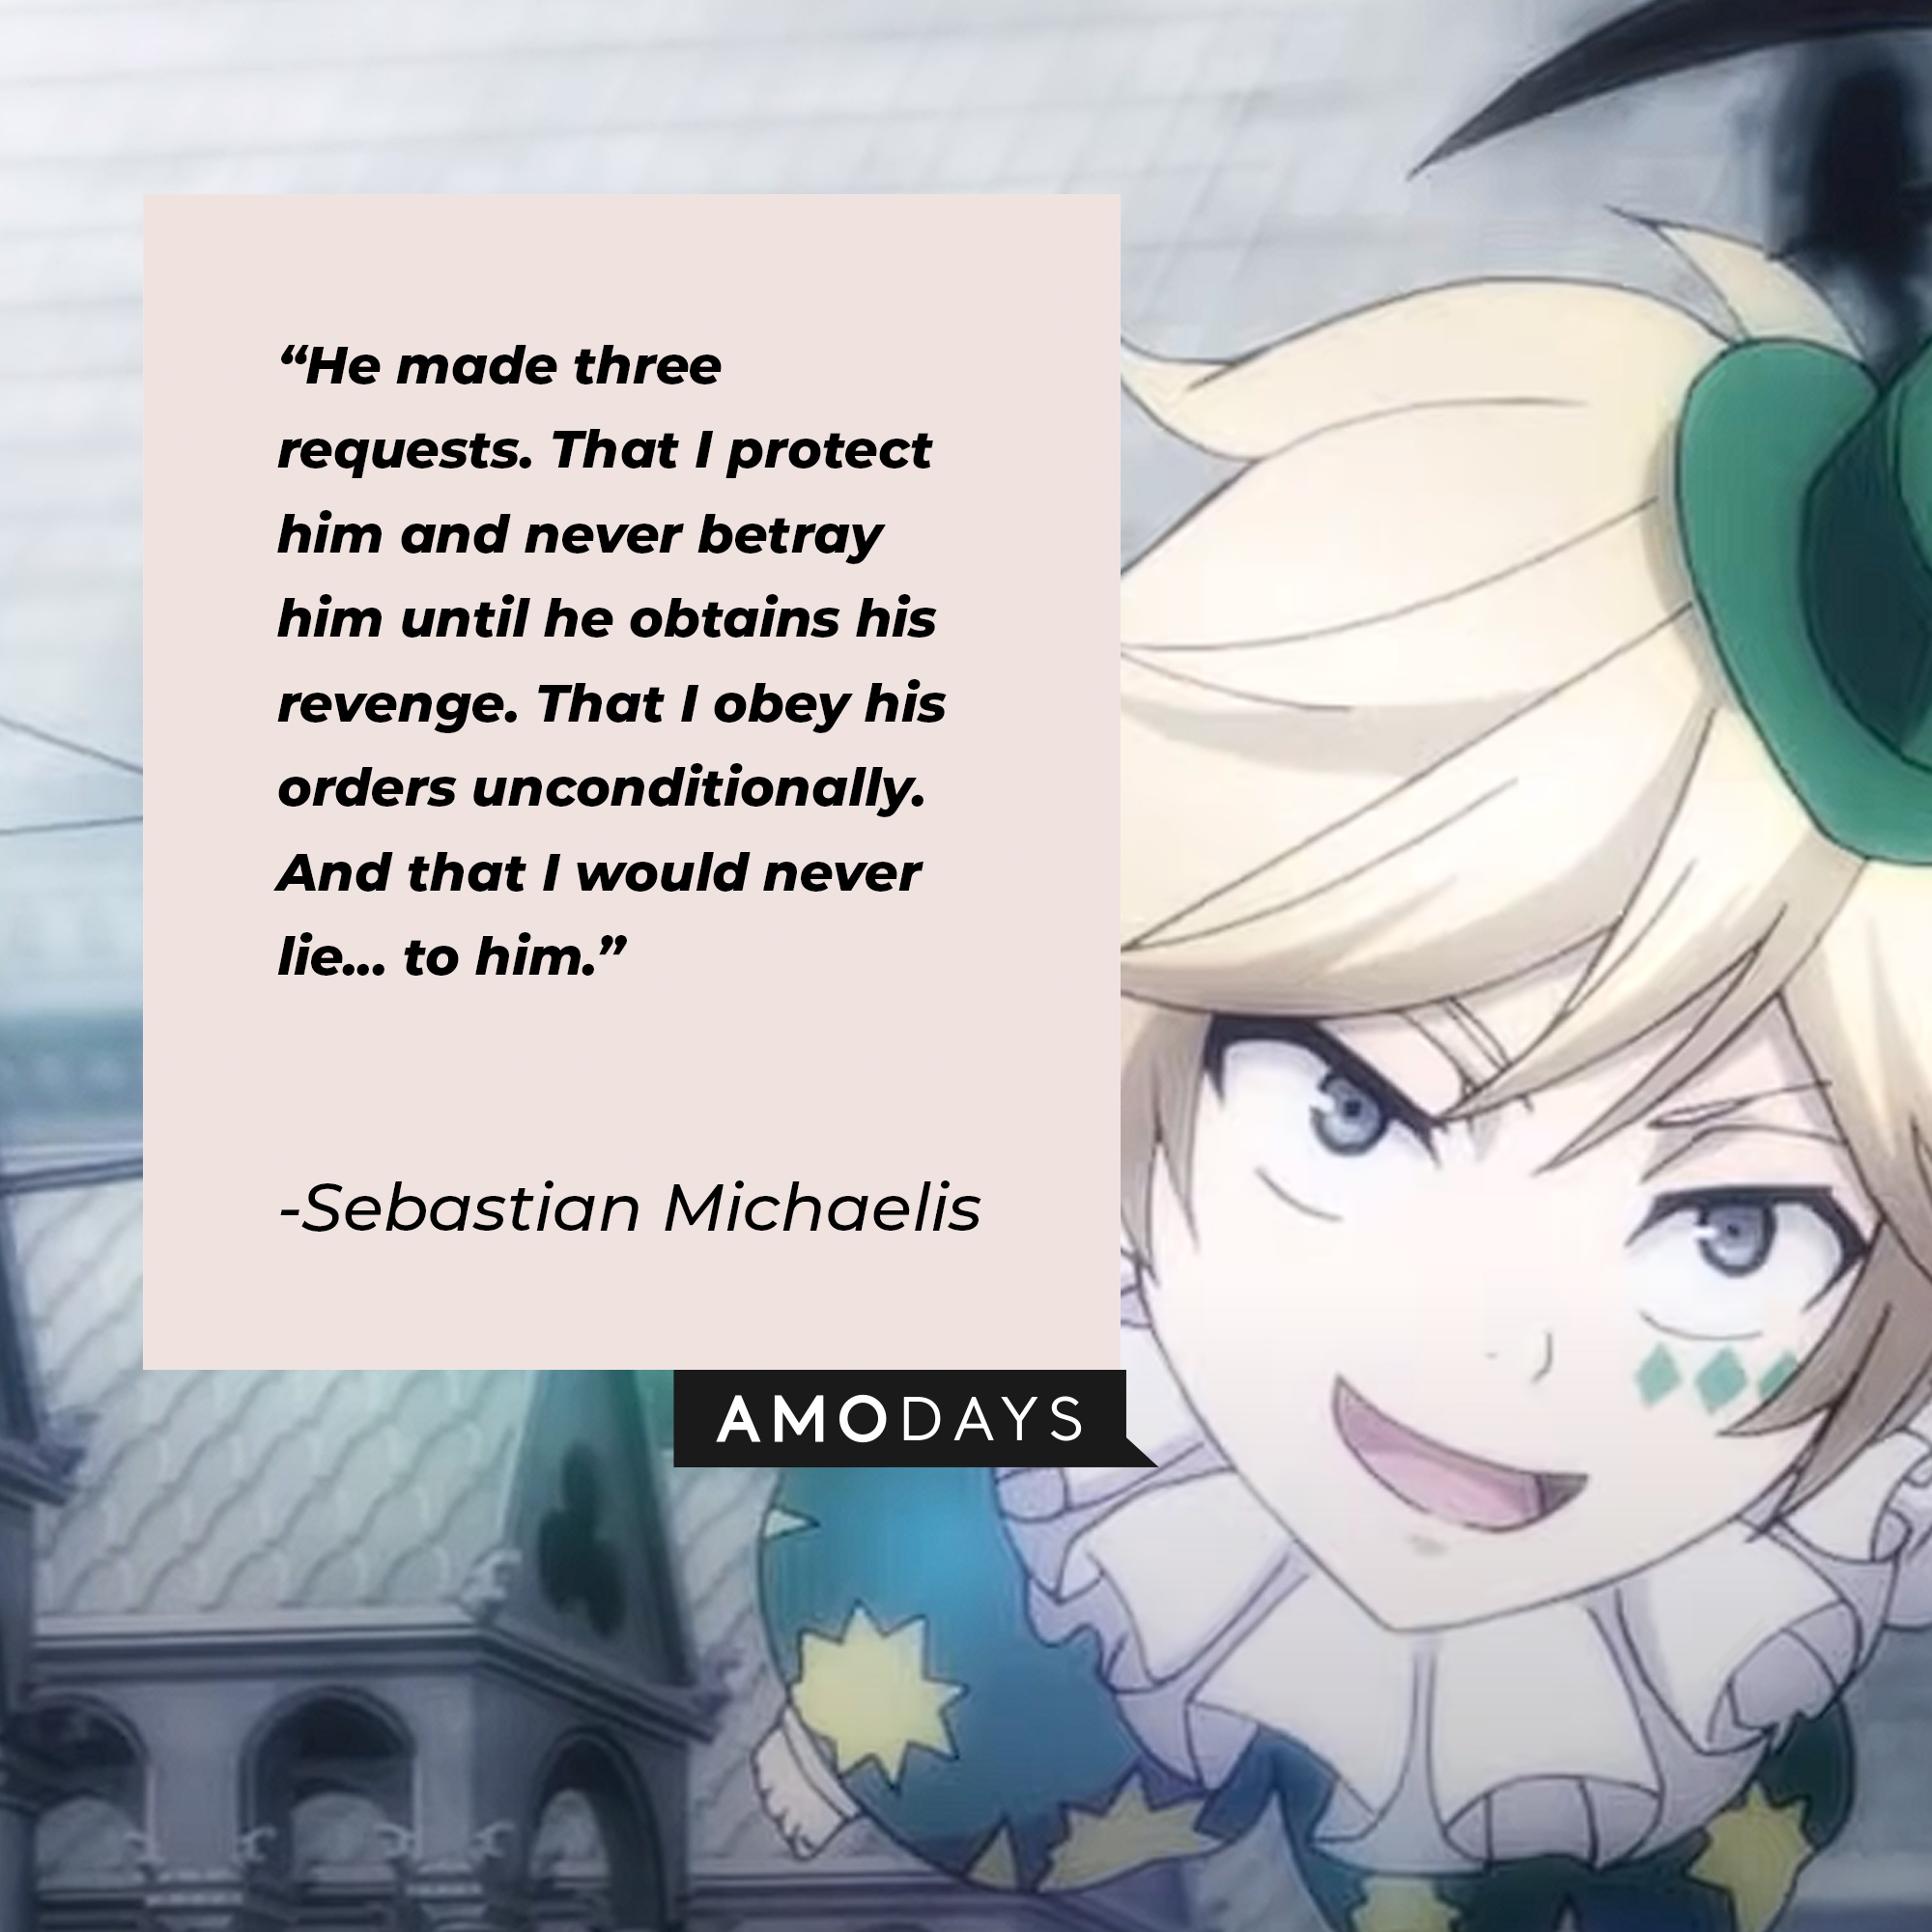 An image from "Black Butler" with Sebastian Michaelis' quote: "He made three requests. That I protect him and never betray him until he obtains his revenge. That I obey his orders unconditionally. And that I would never lie... to him." | Source: youtube.com/Crunchyroll Dubs